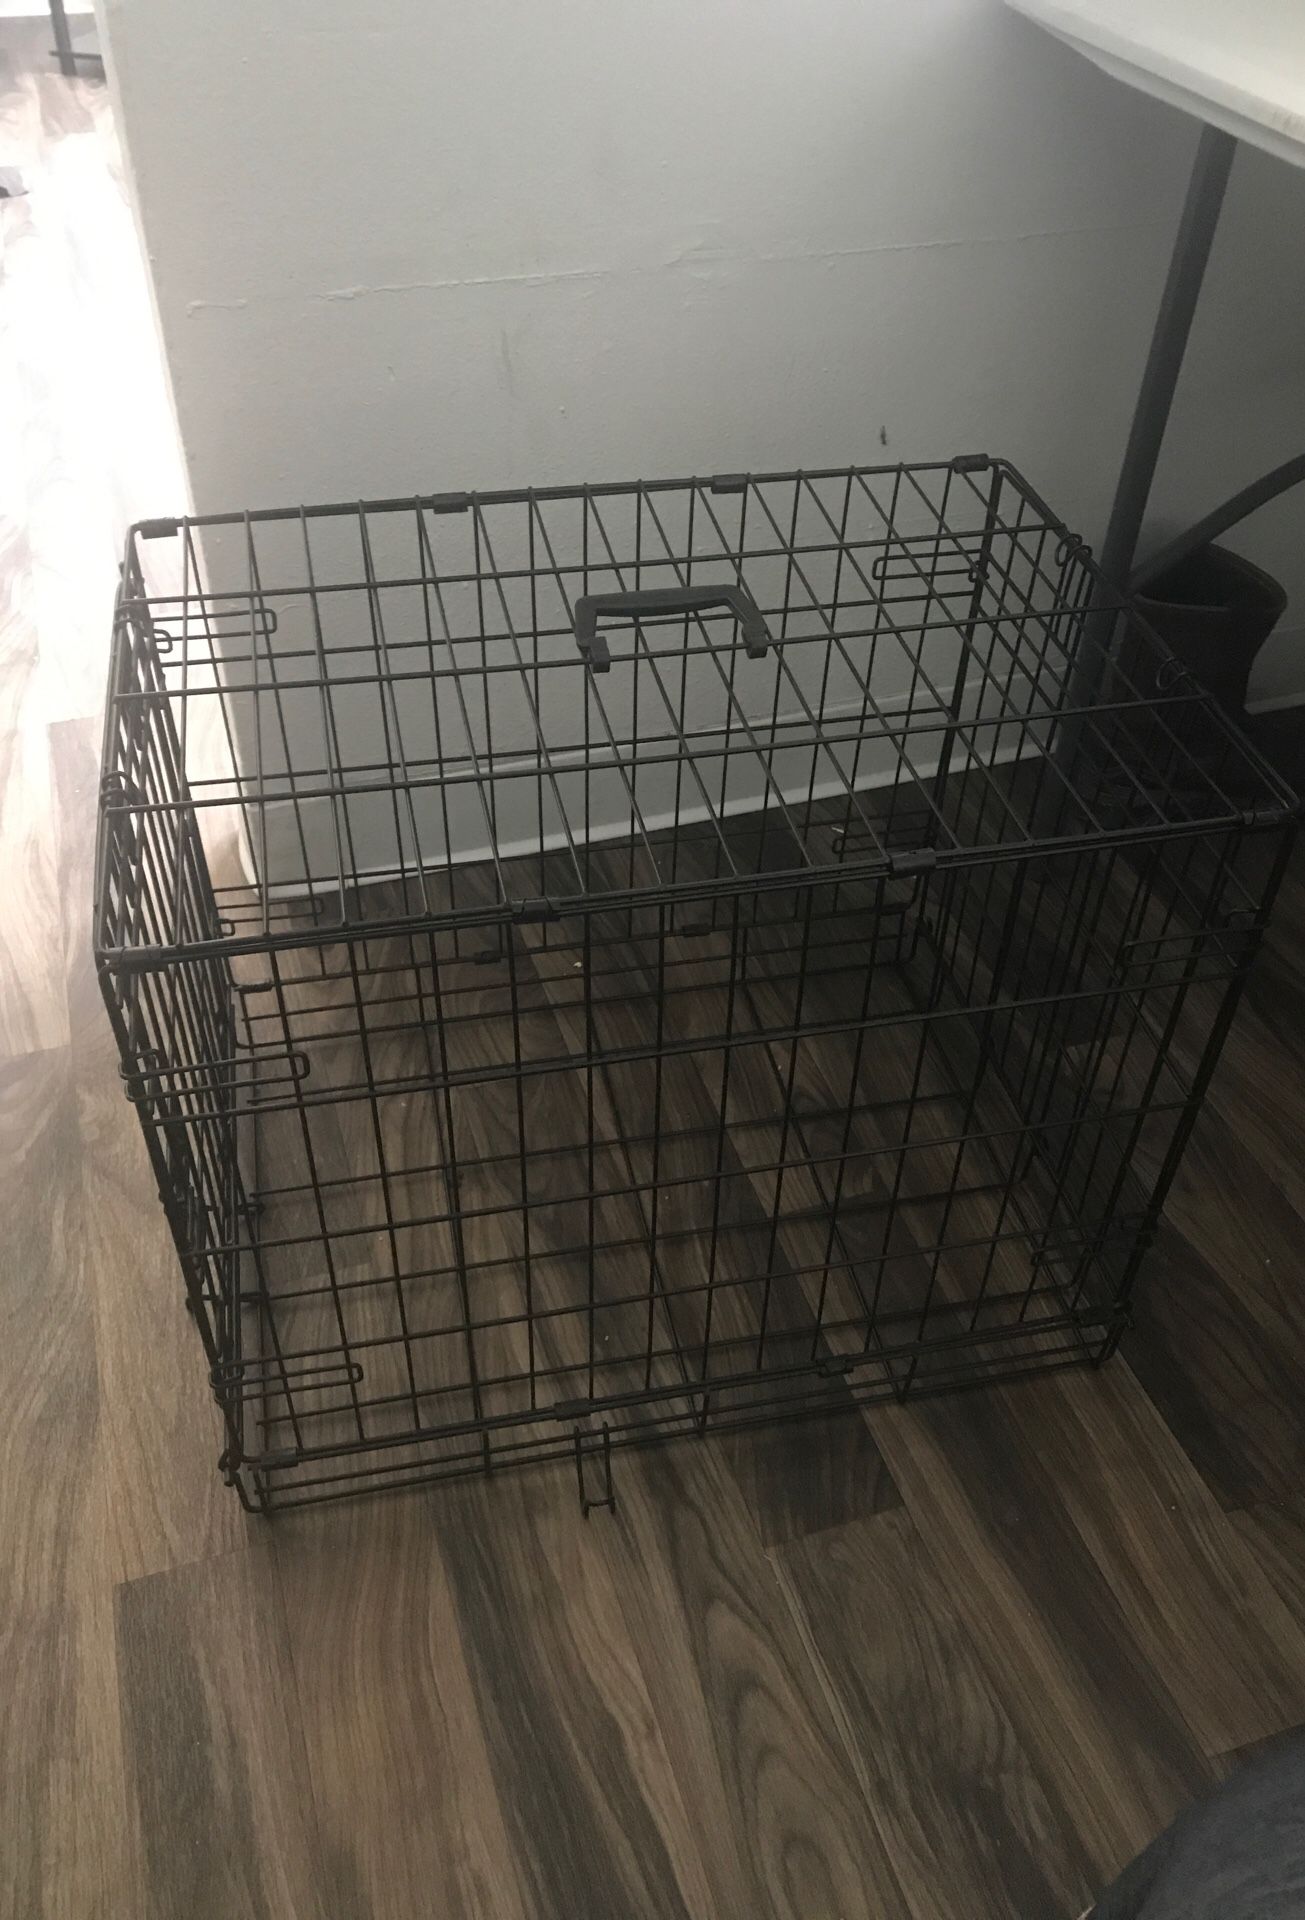 Collapsible travel Kennel for medium sized dog